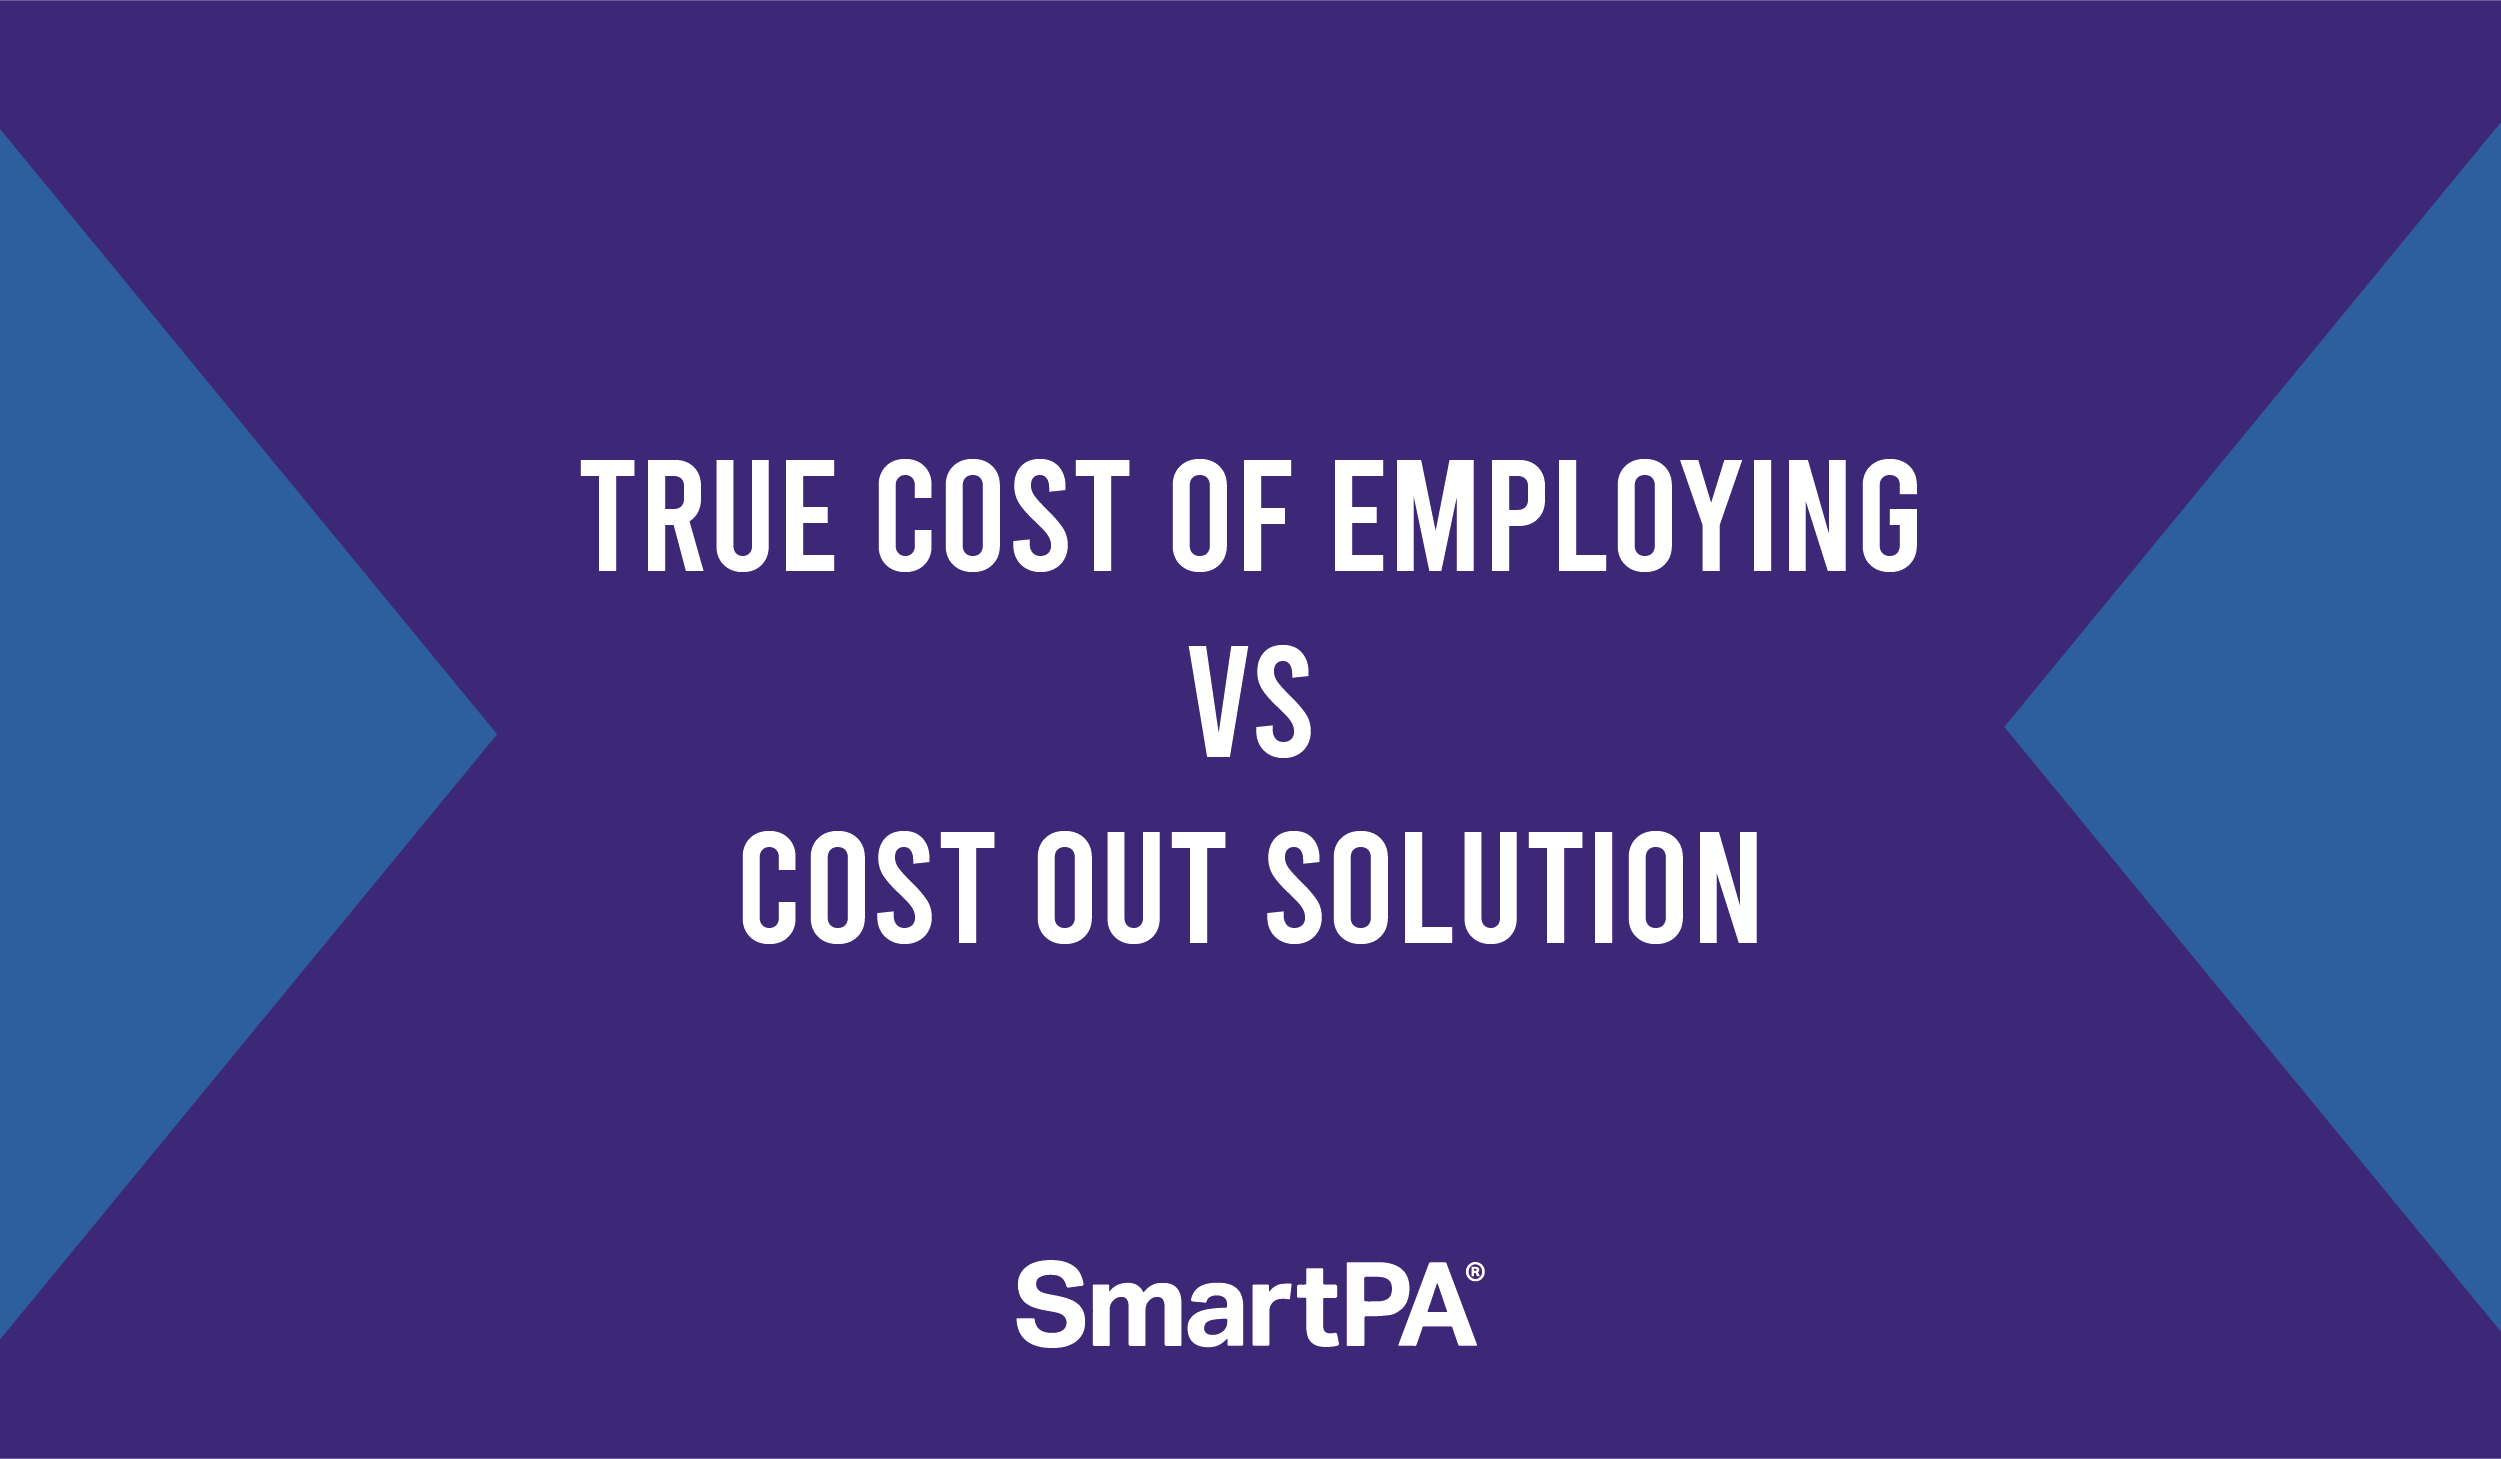 True Cost of Employing vs Cost Out Solution